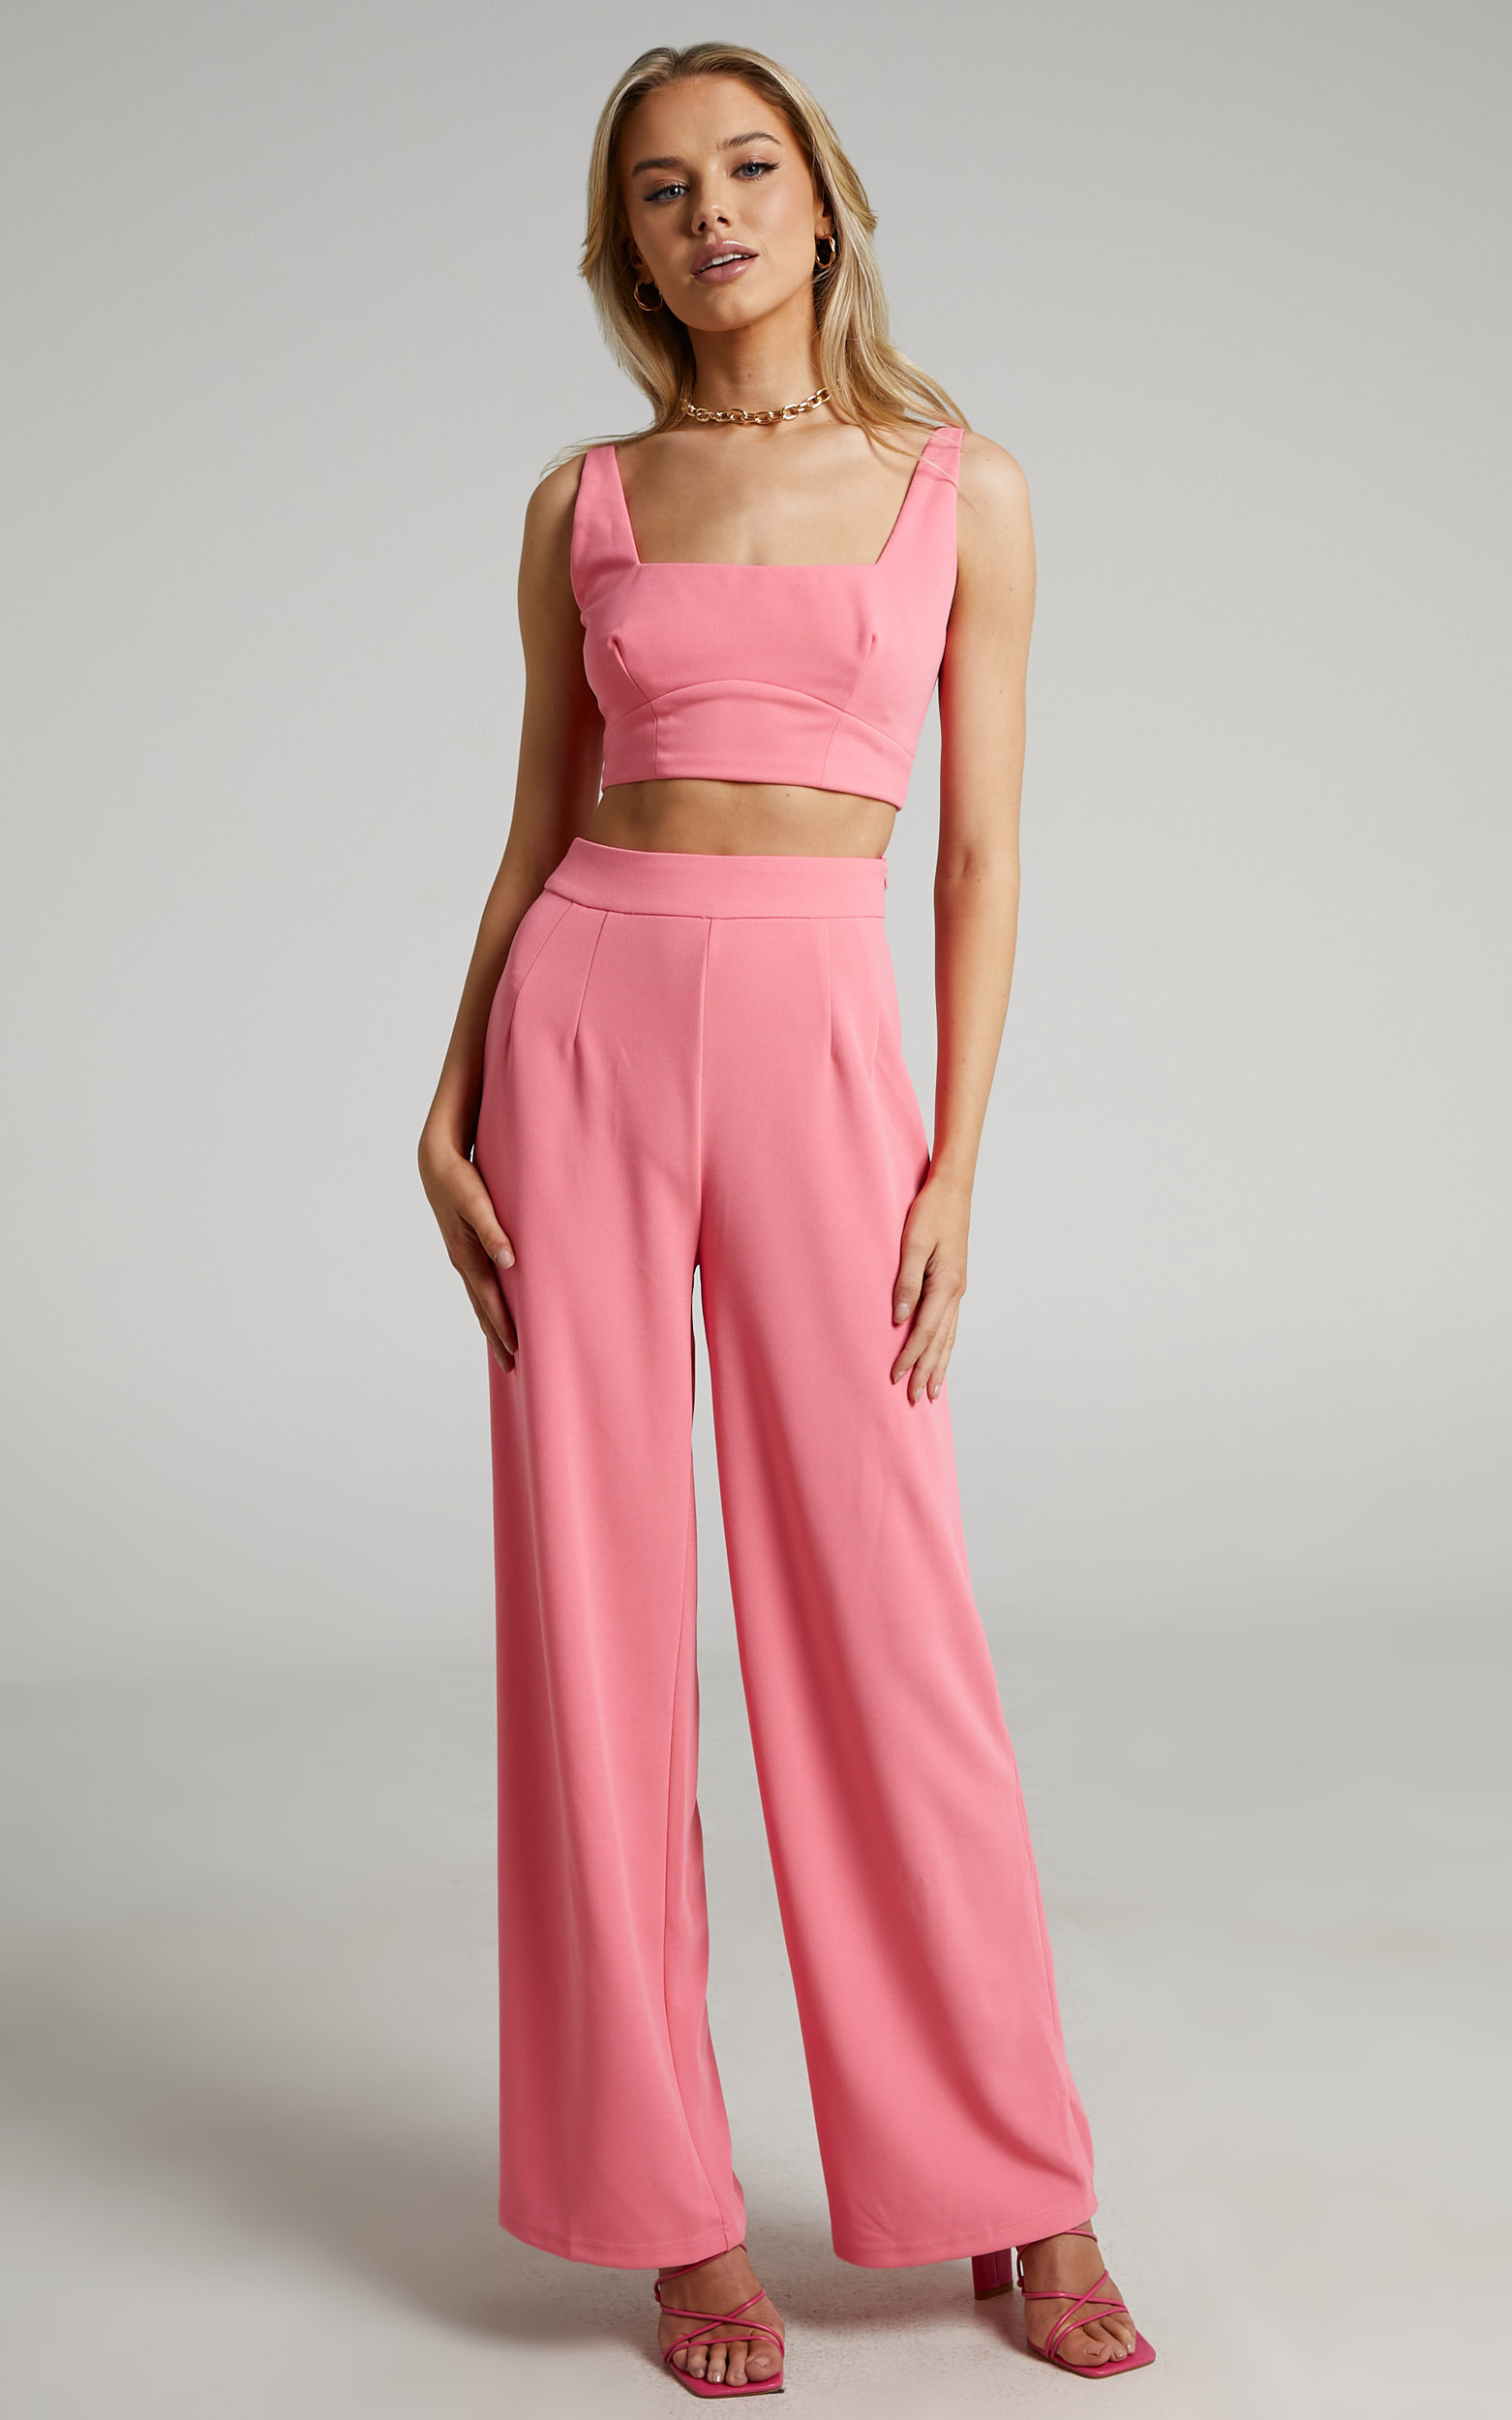 Elibeth Two Piece Set - Crop Top and High Waisted Wide Leg Pants in Bubblegum Pink - 04, PNK2, hi-res image number null